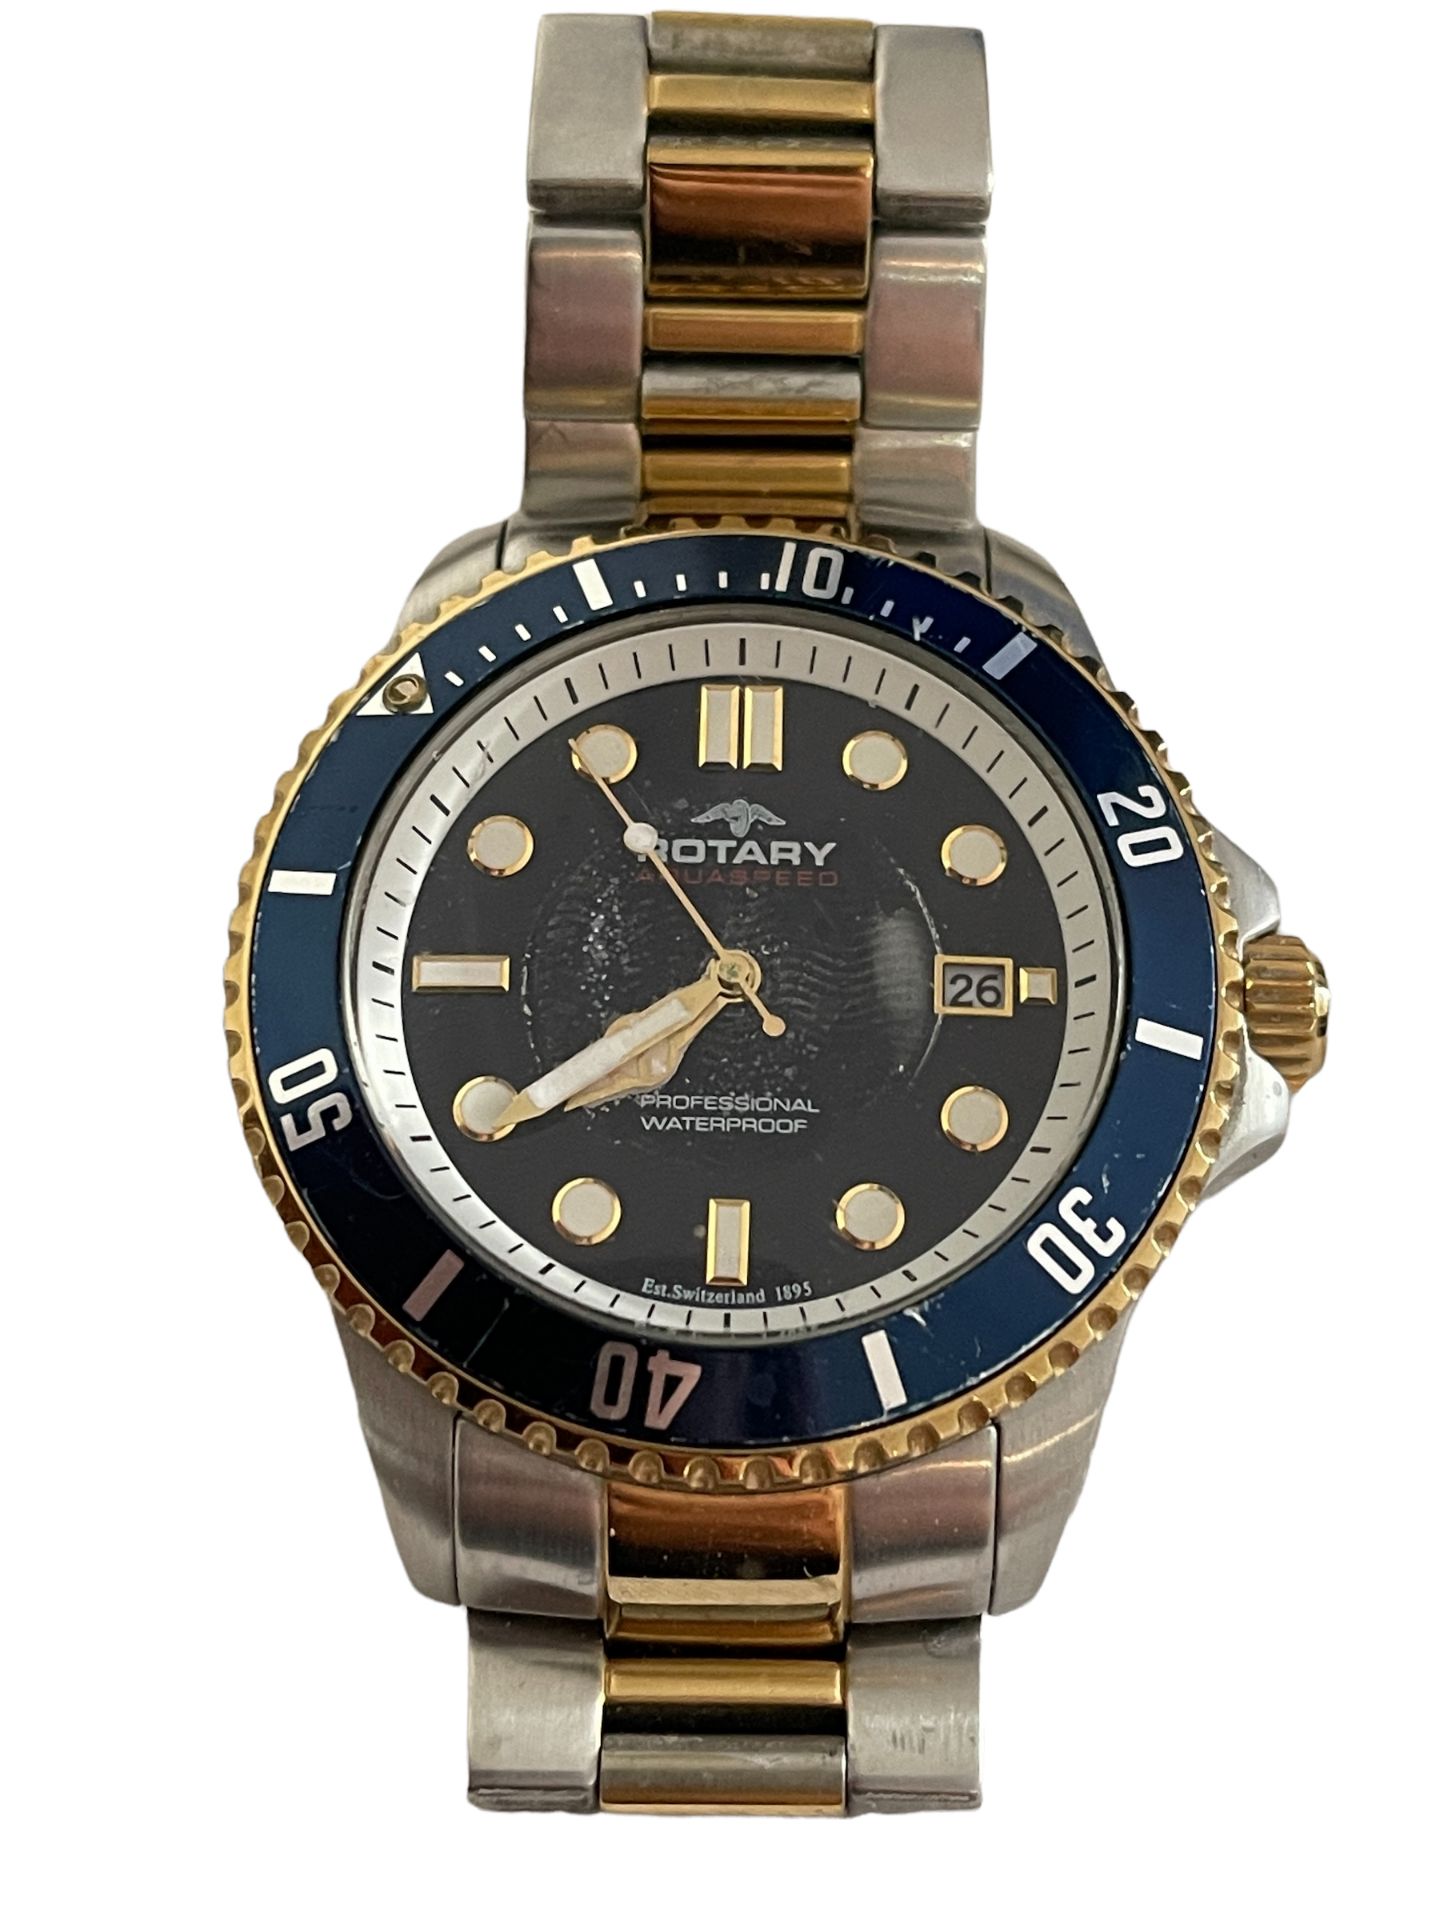 Rotary Mens Divers Watch - Ex Demo or Return Stock from our Private Jet Charter - Image 2 of 5